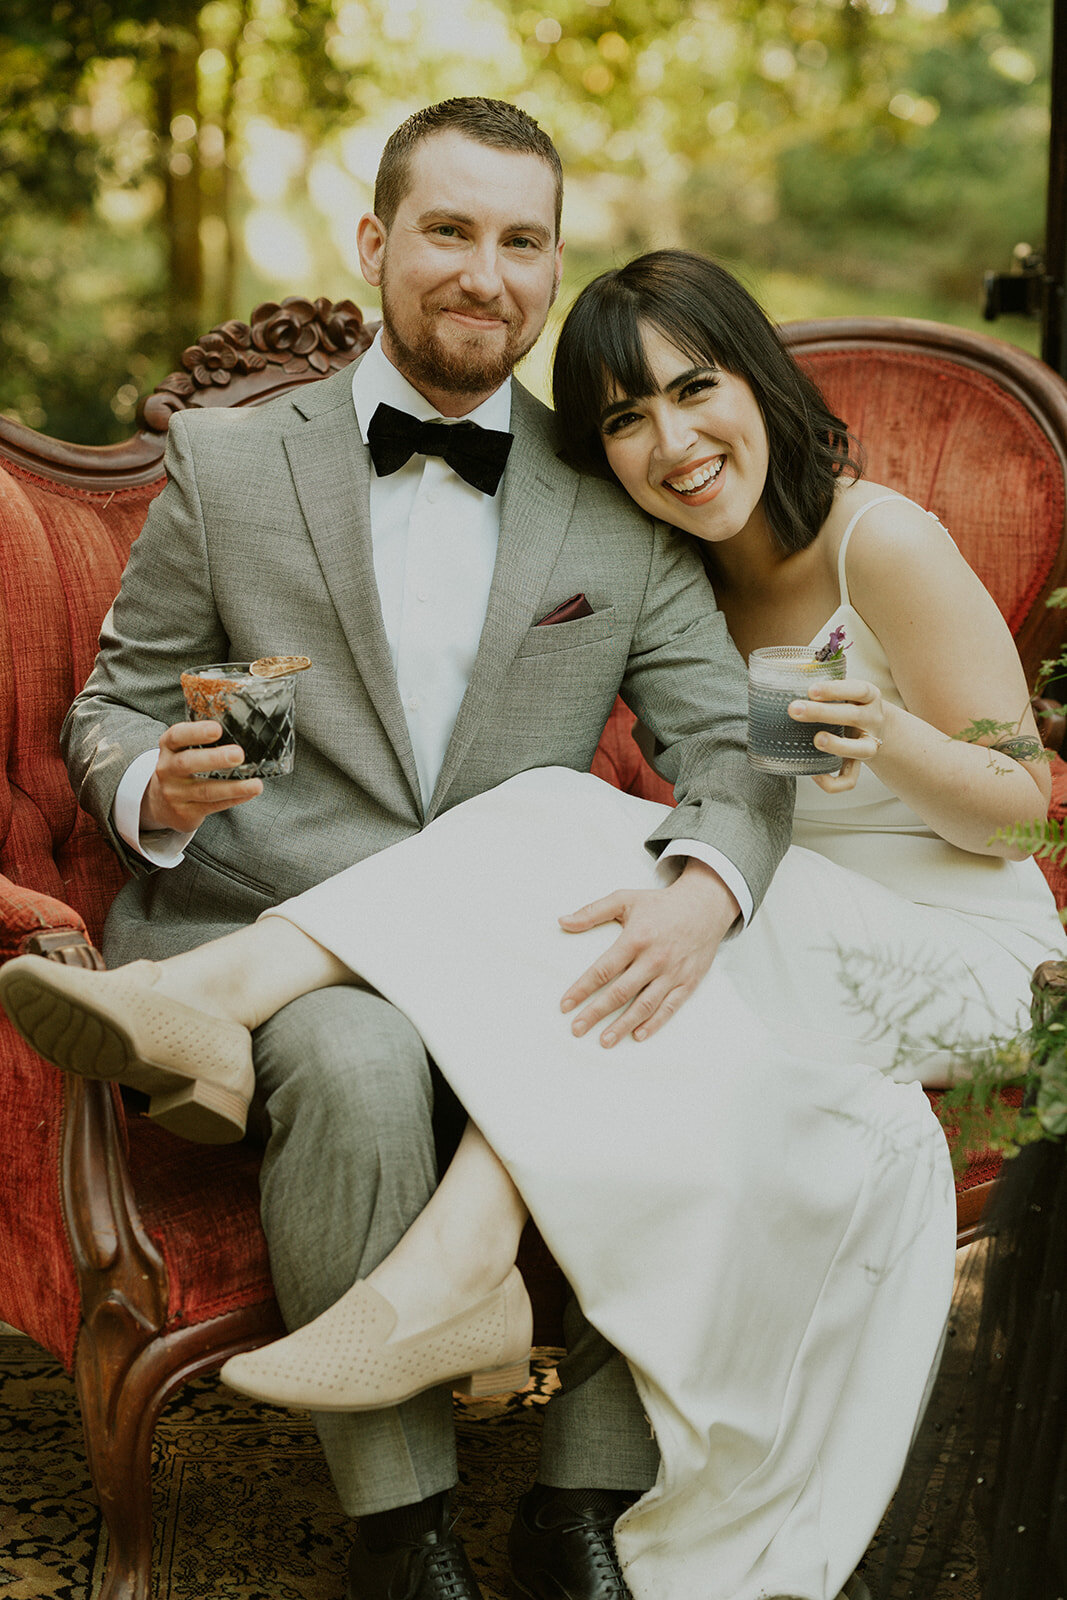 the-bride-and-the-groom-sit-on-the-sofa-with-glasses-in-hand-smiling